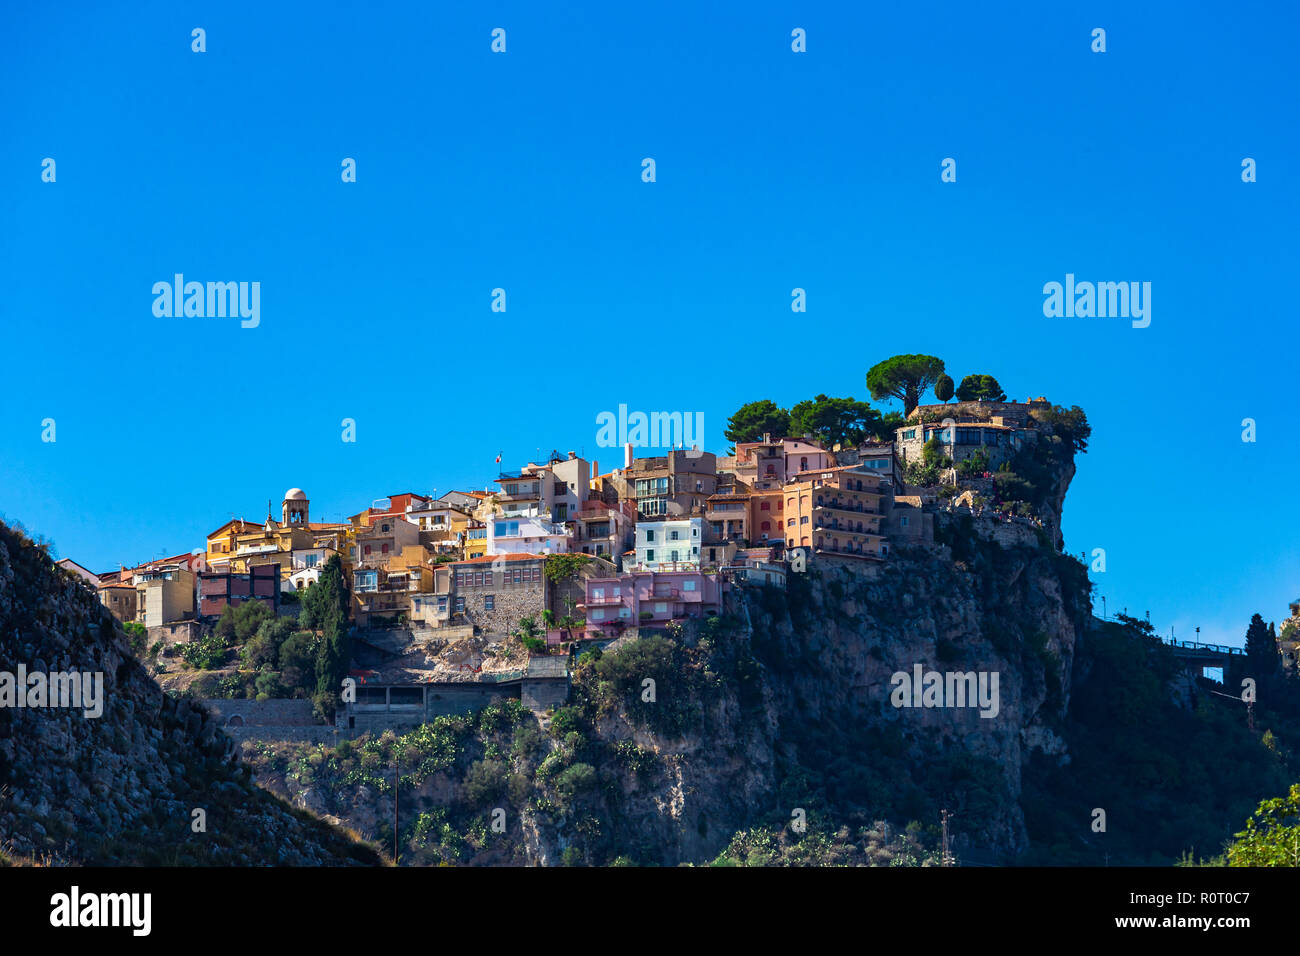 Castelmola: typical Sicilian village perched on a mountain, close to ...